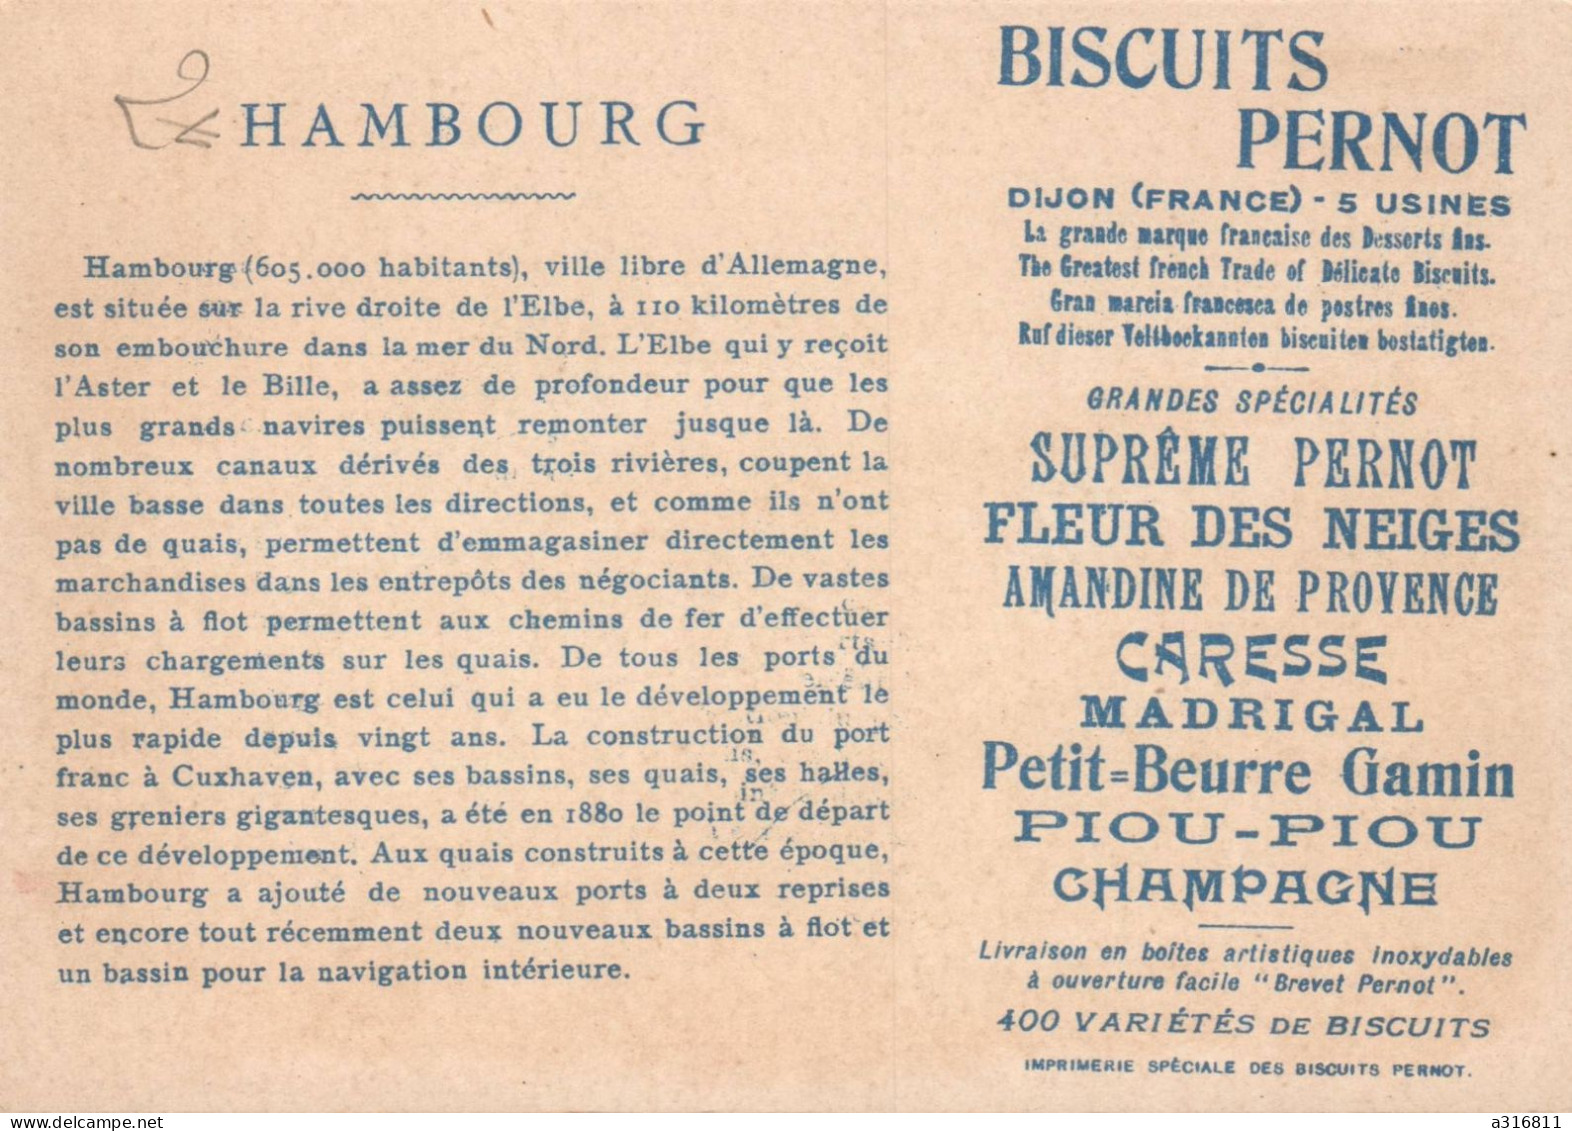 CHROMO BISCUITS PERNOT Hambourg - Pernot